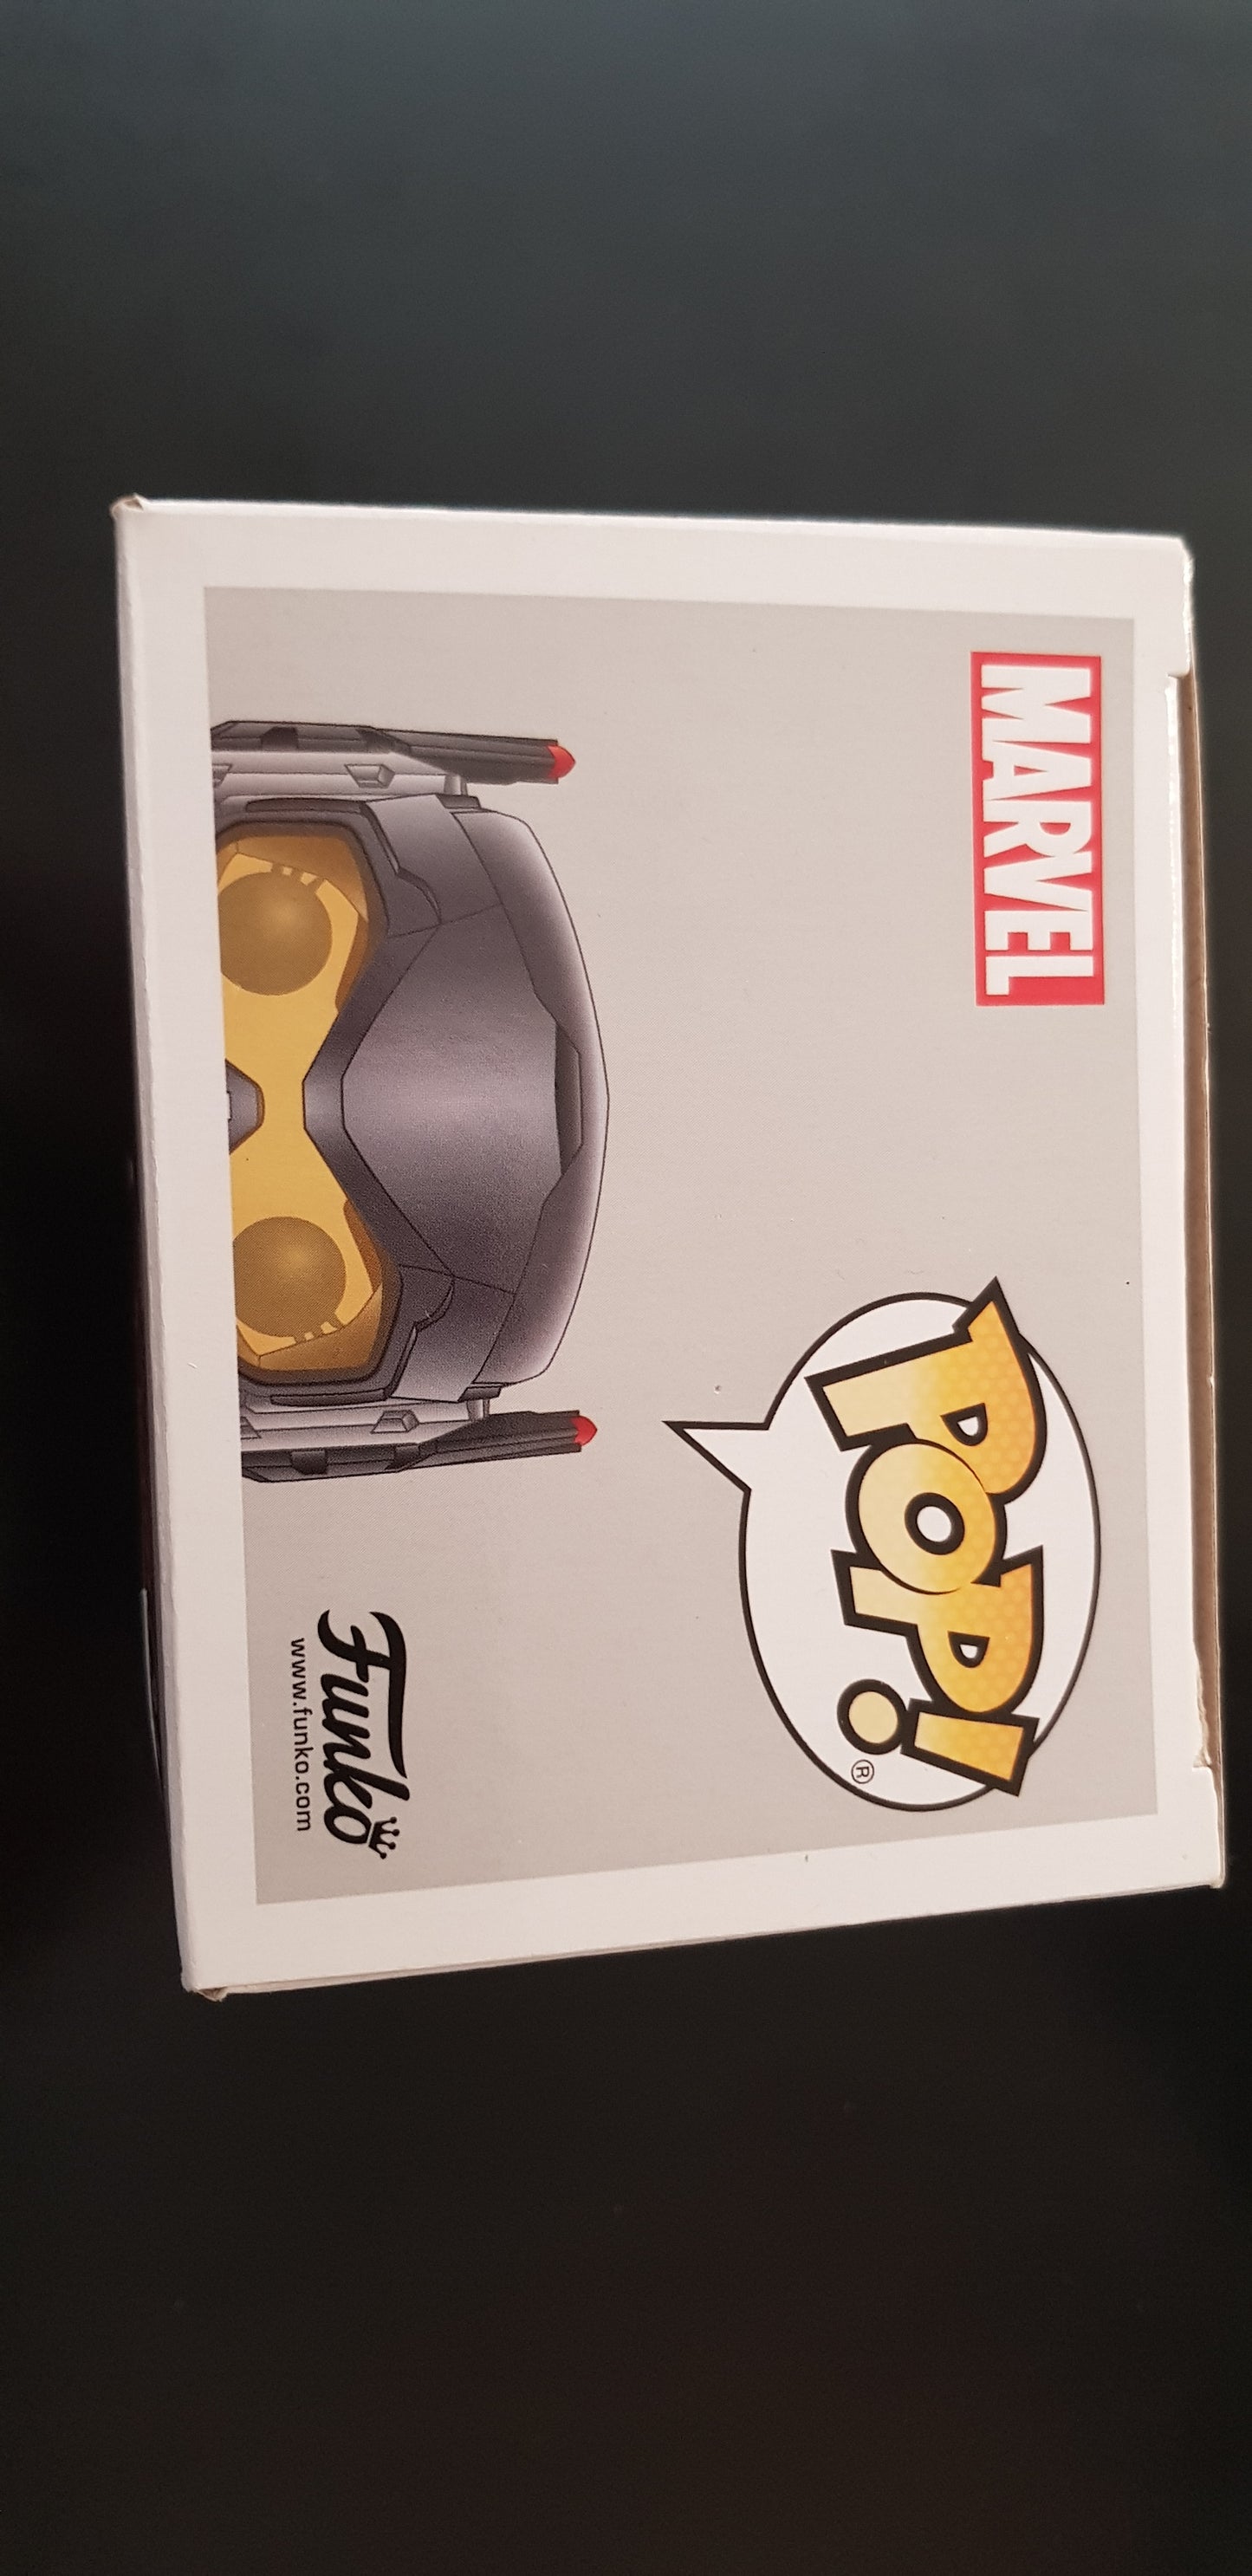 WASP-ANTMAN AND THE WASP-MARVEL-FUNKO-PRELOVED